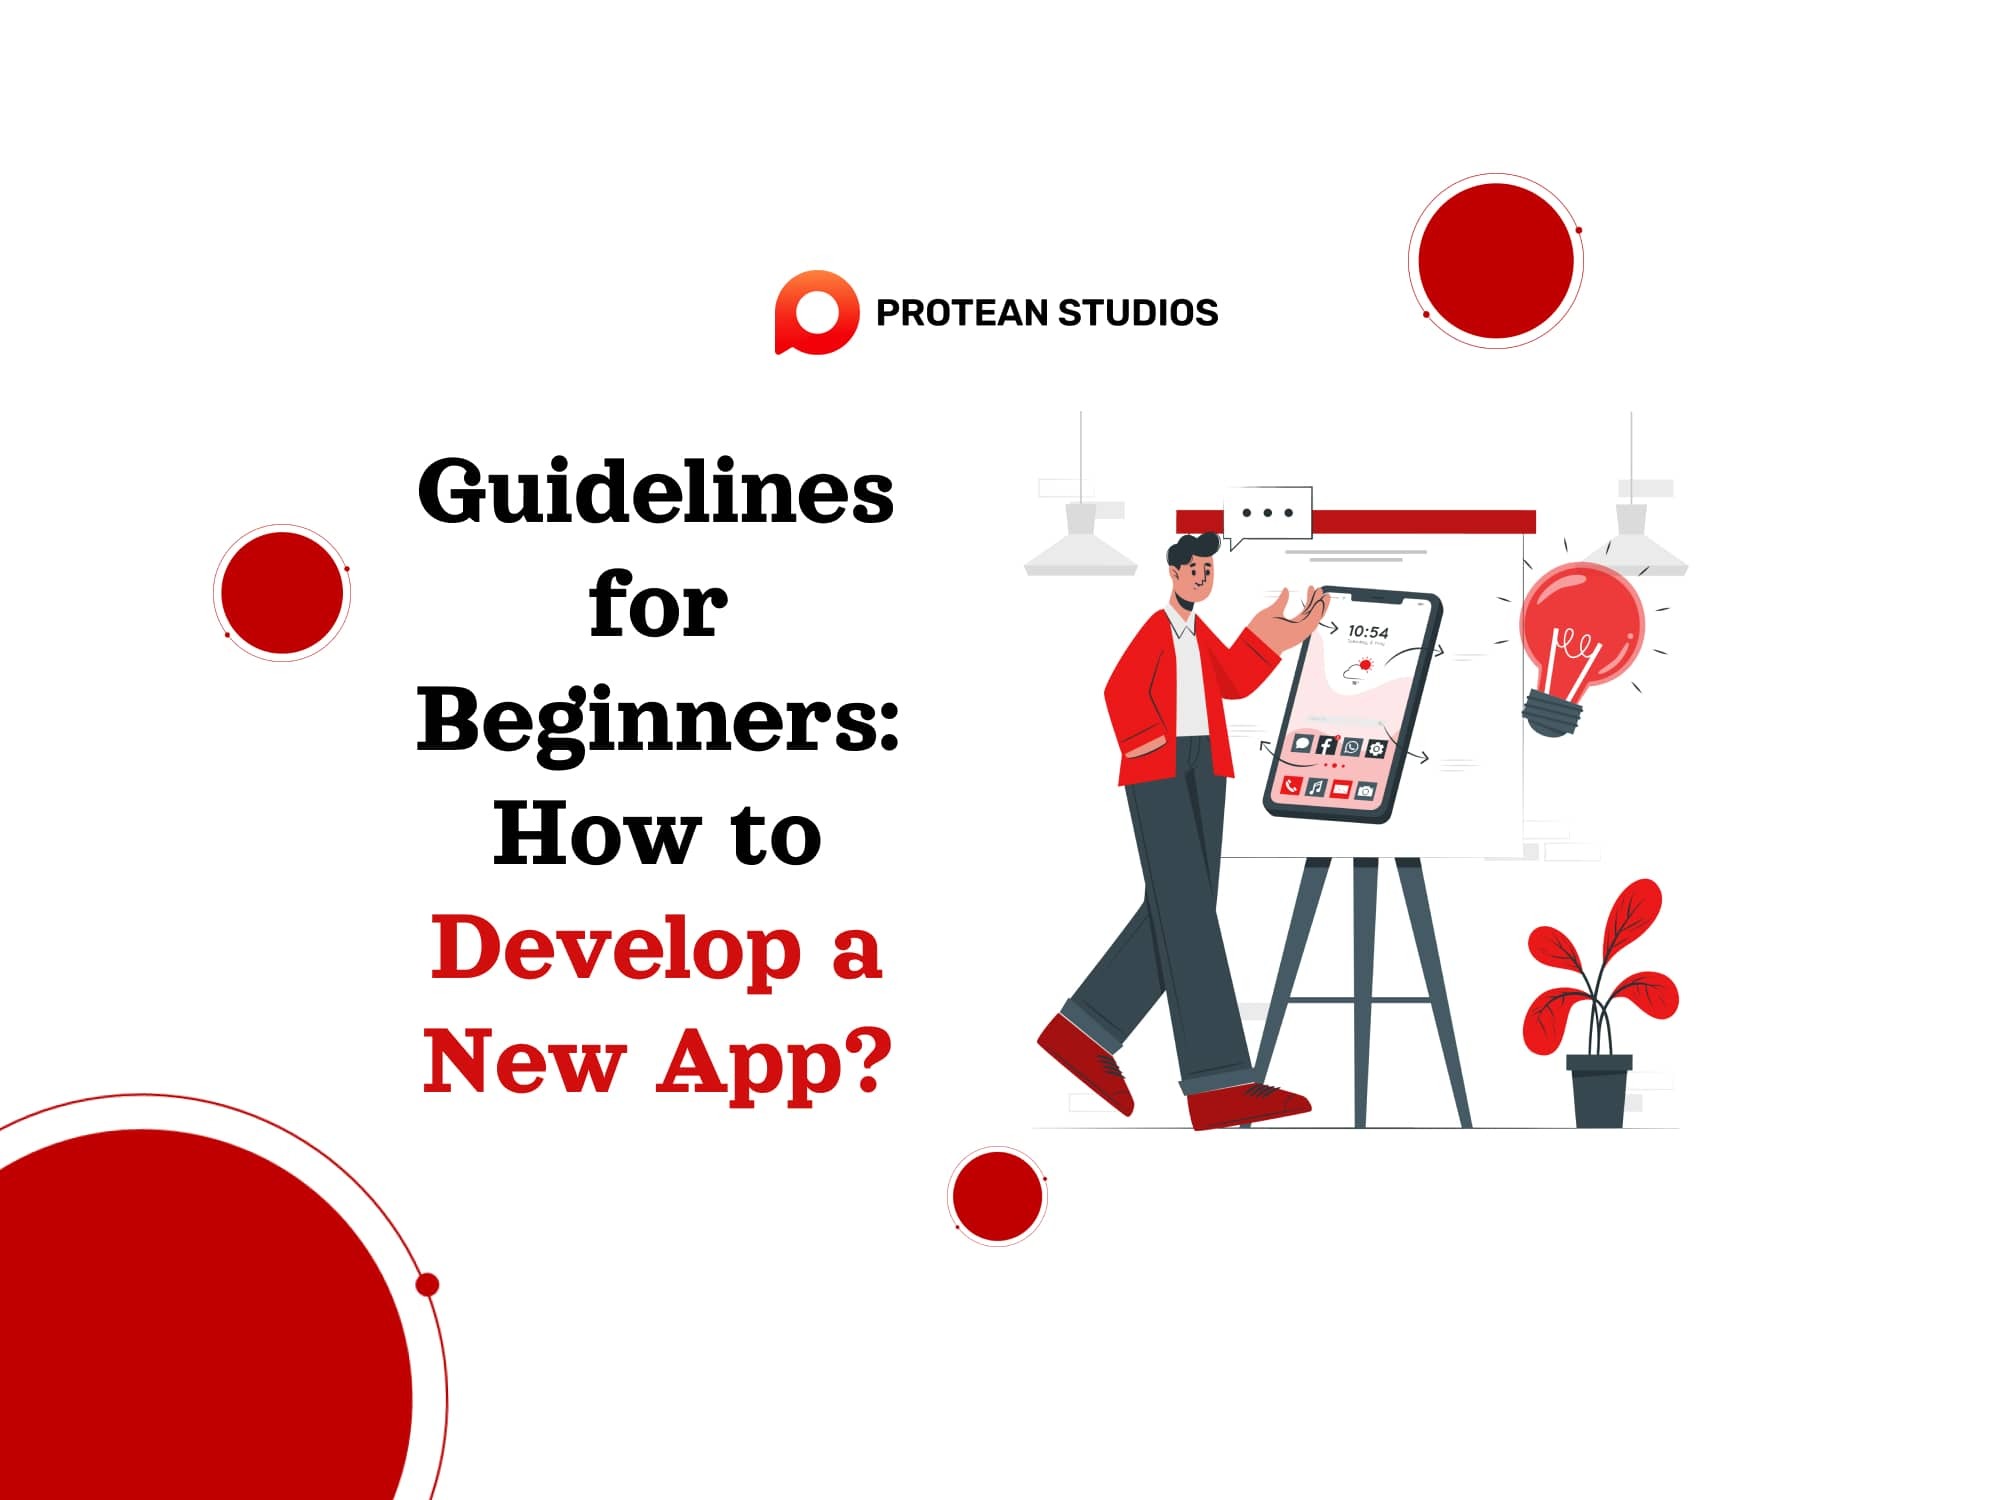 Guidelines for Beginners: How to Develop a New App?